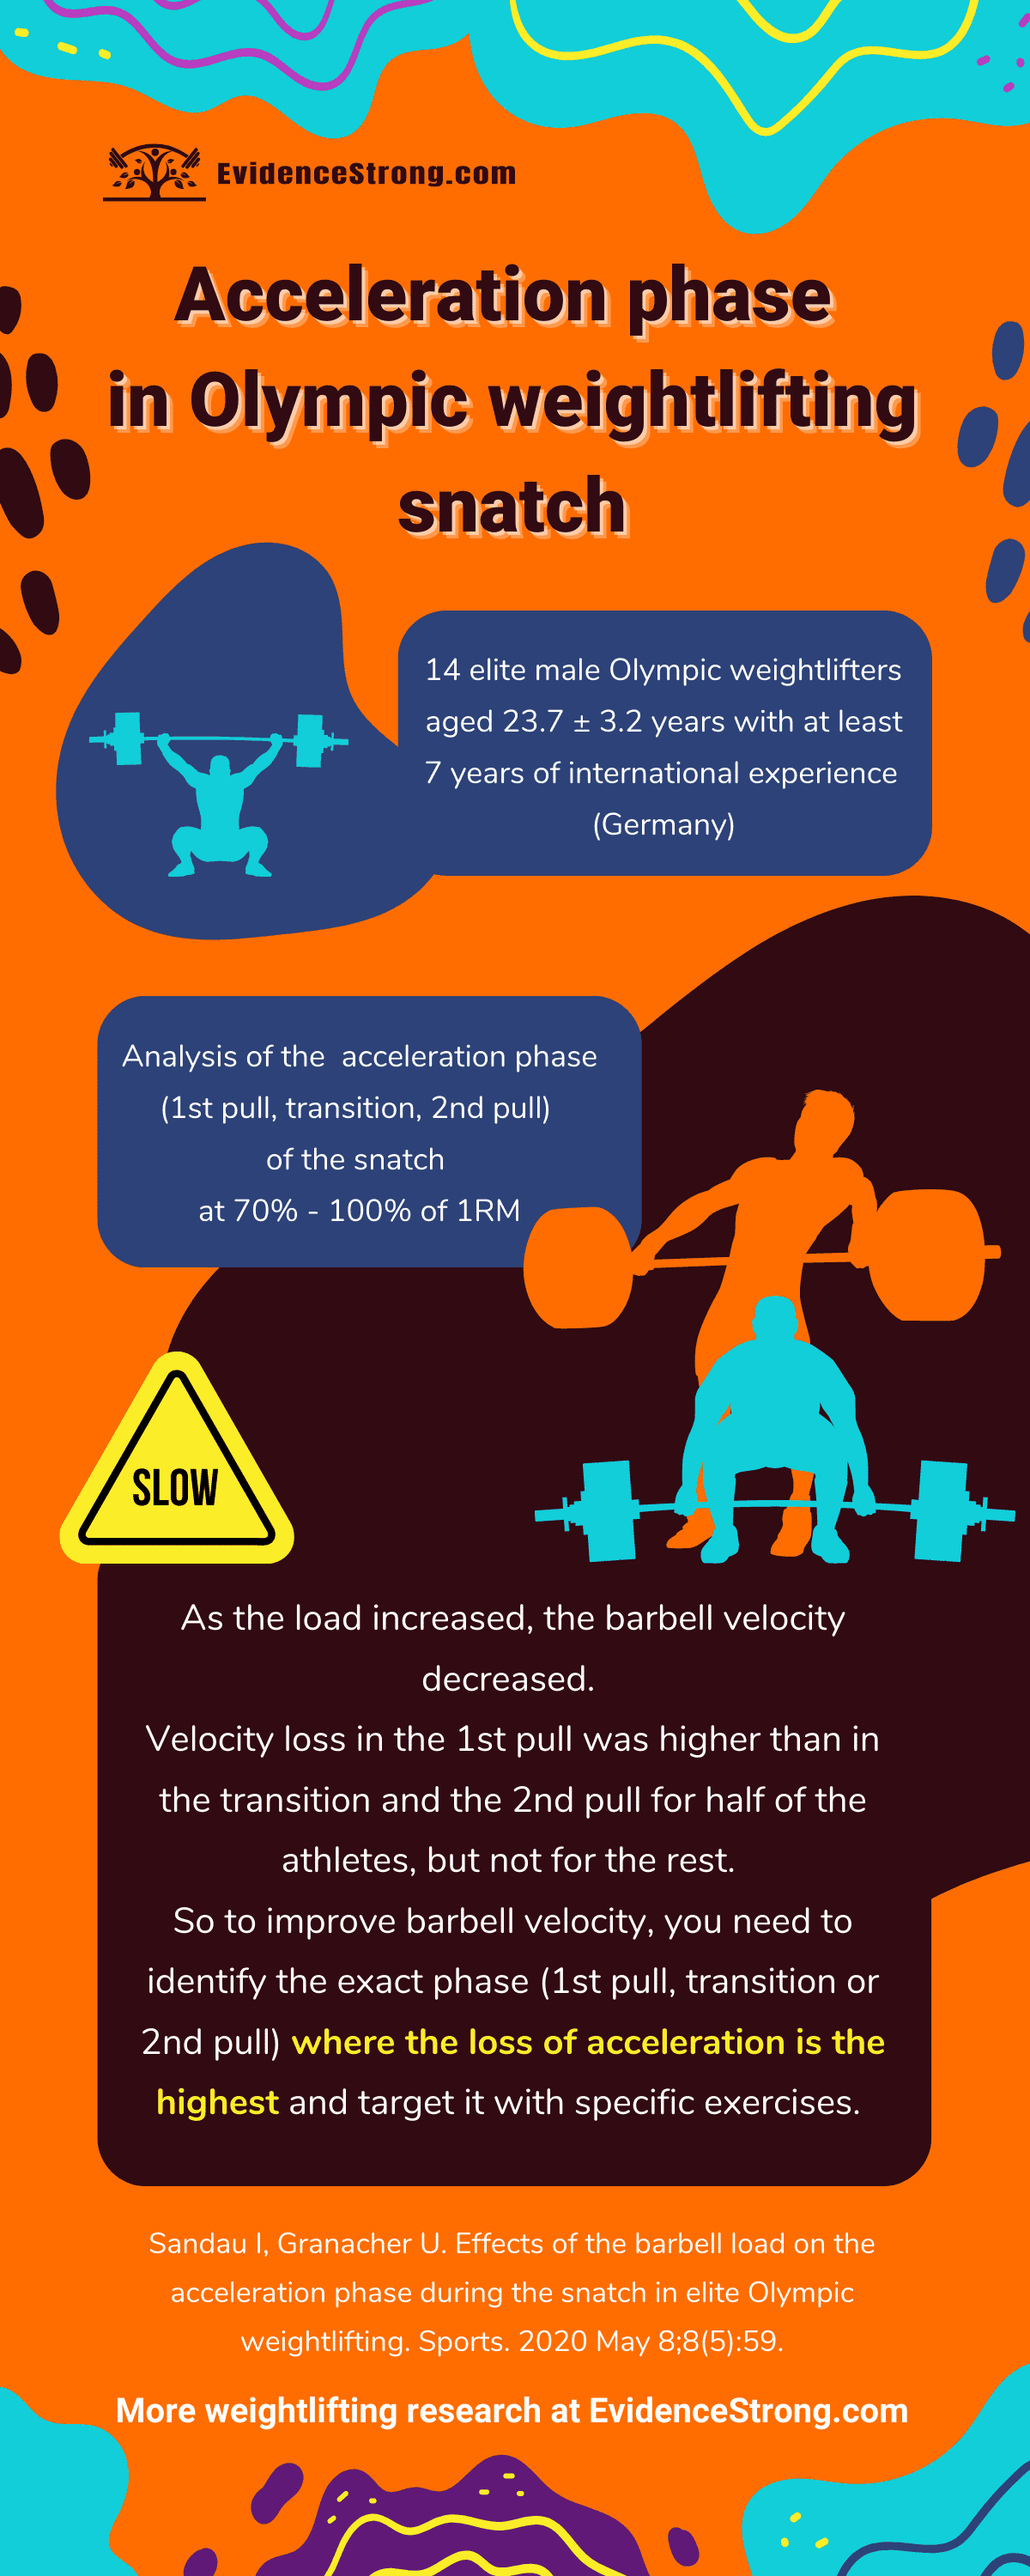 Acceleration phase in Olympic weightlifting snatch - Infographic